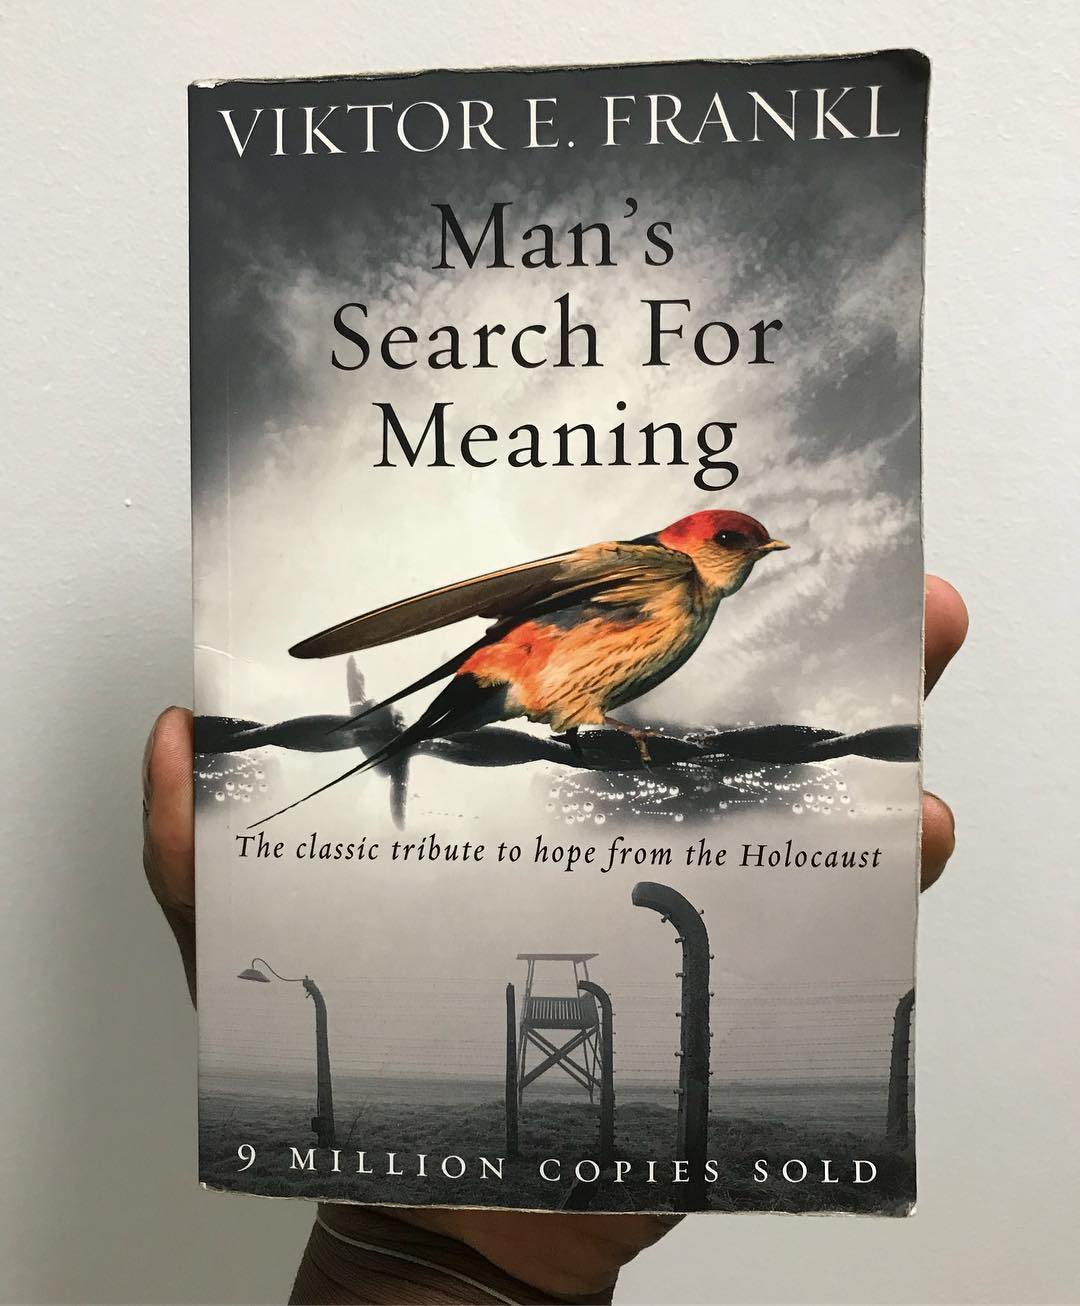 Man's Search For Meaning by Viktor E. Frankl — Clintonslibrary